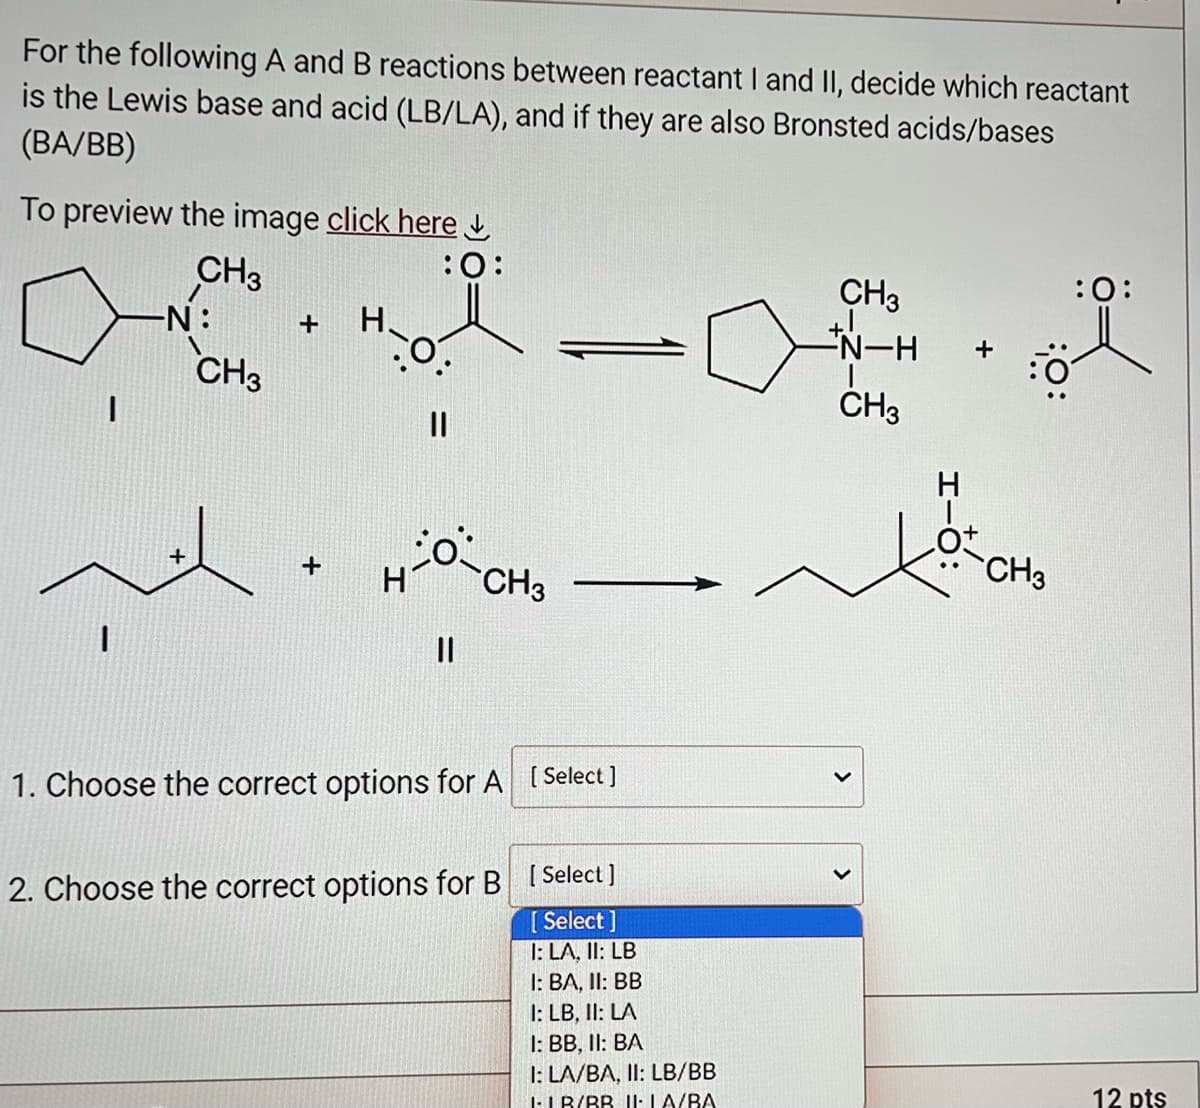 For the following A and B reactions between reactant I and II, decide which reactant
is the Lewis base and acid (LB/LA), and if they are also Bronsted acids/bases
(BA/BB)
To preview the image click here
CH3
1
-N:
CH3
+ H.
+
:O:
||
HO-CH3
||
1. Choose the correct options for A [Select]
2. Choose the correct options for B [Select]
[Select]
I: LA. II: LB
I: BA, II: BB
1: LB, II: LA
1: BB, II: BA
1: LA/BA, II: LB/BB
ILB/BB II: LA/BA
CH3
+1
-N-H
CH3
>
HIO:
CH3
:0:
12 pts